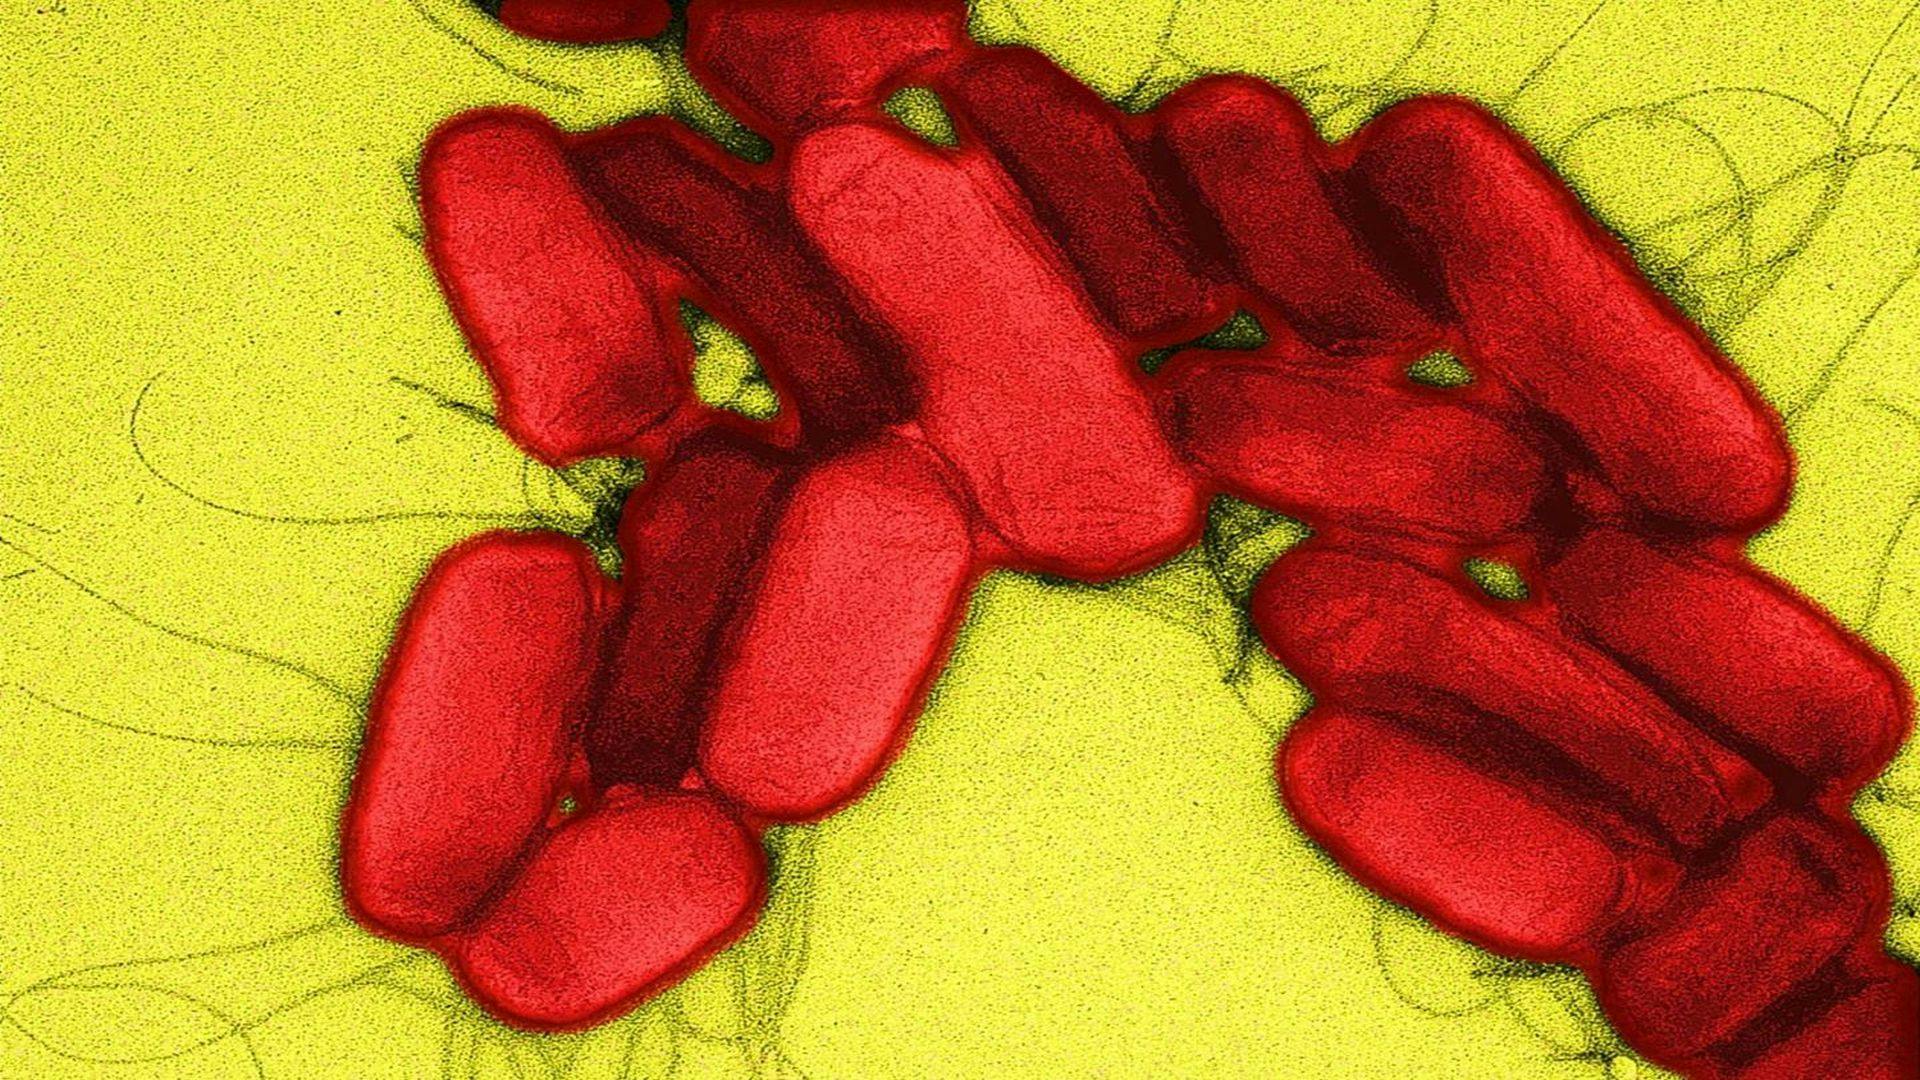 Genome Scientists Use UK Salmonella Cases to Shed Light on African Epidemic